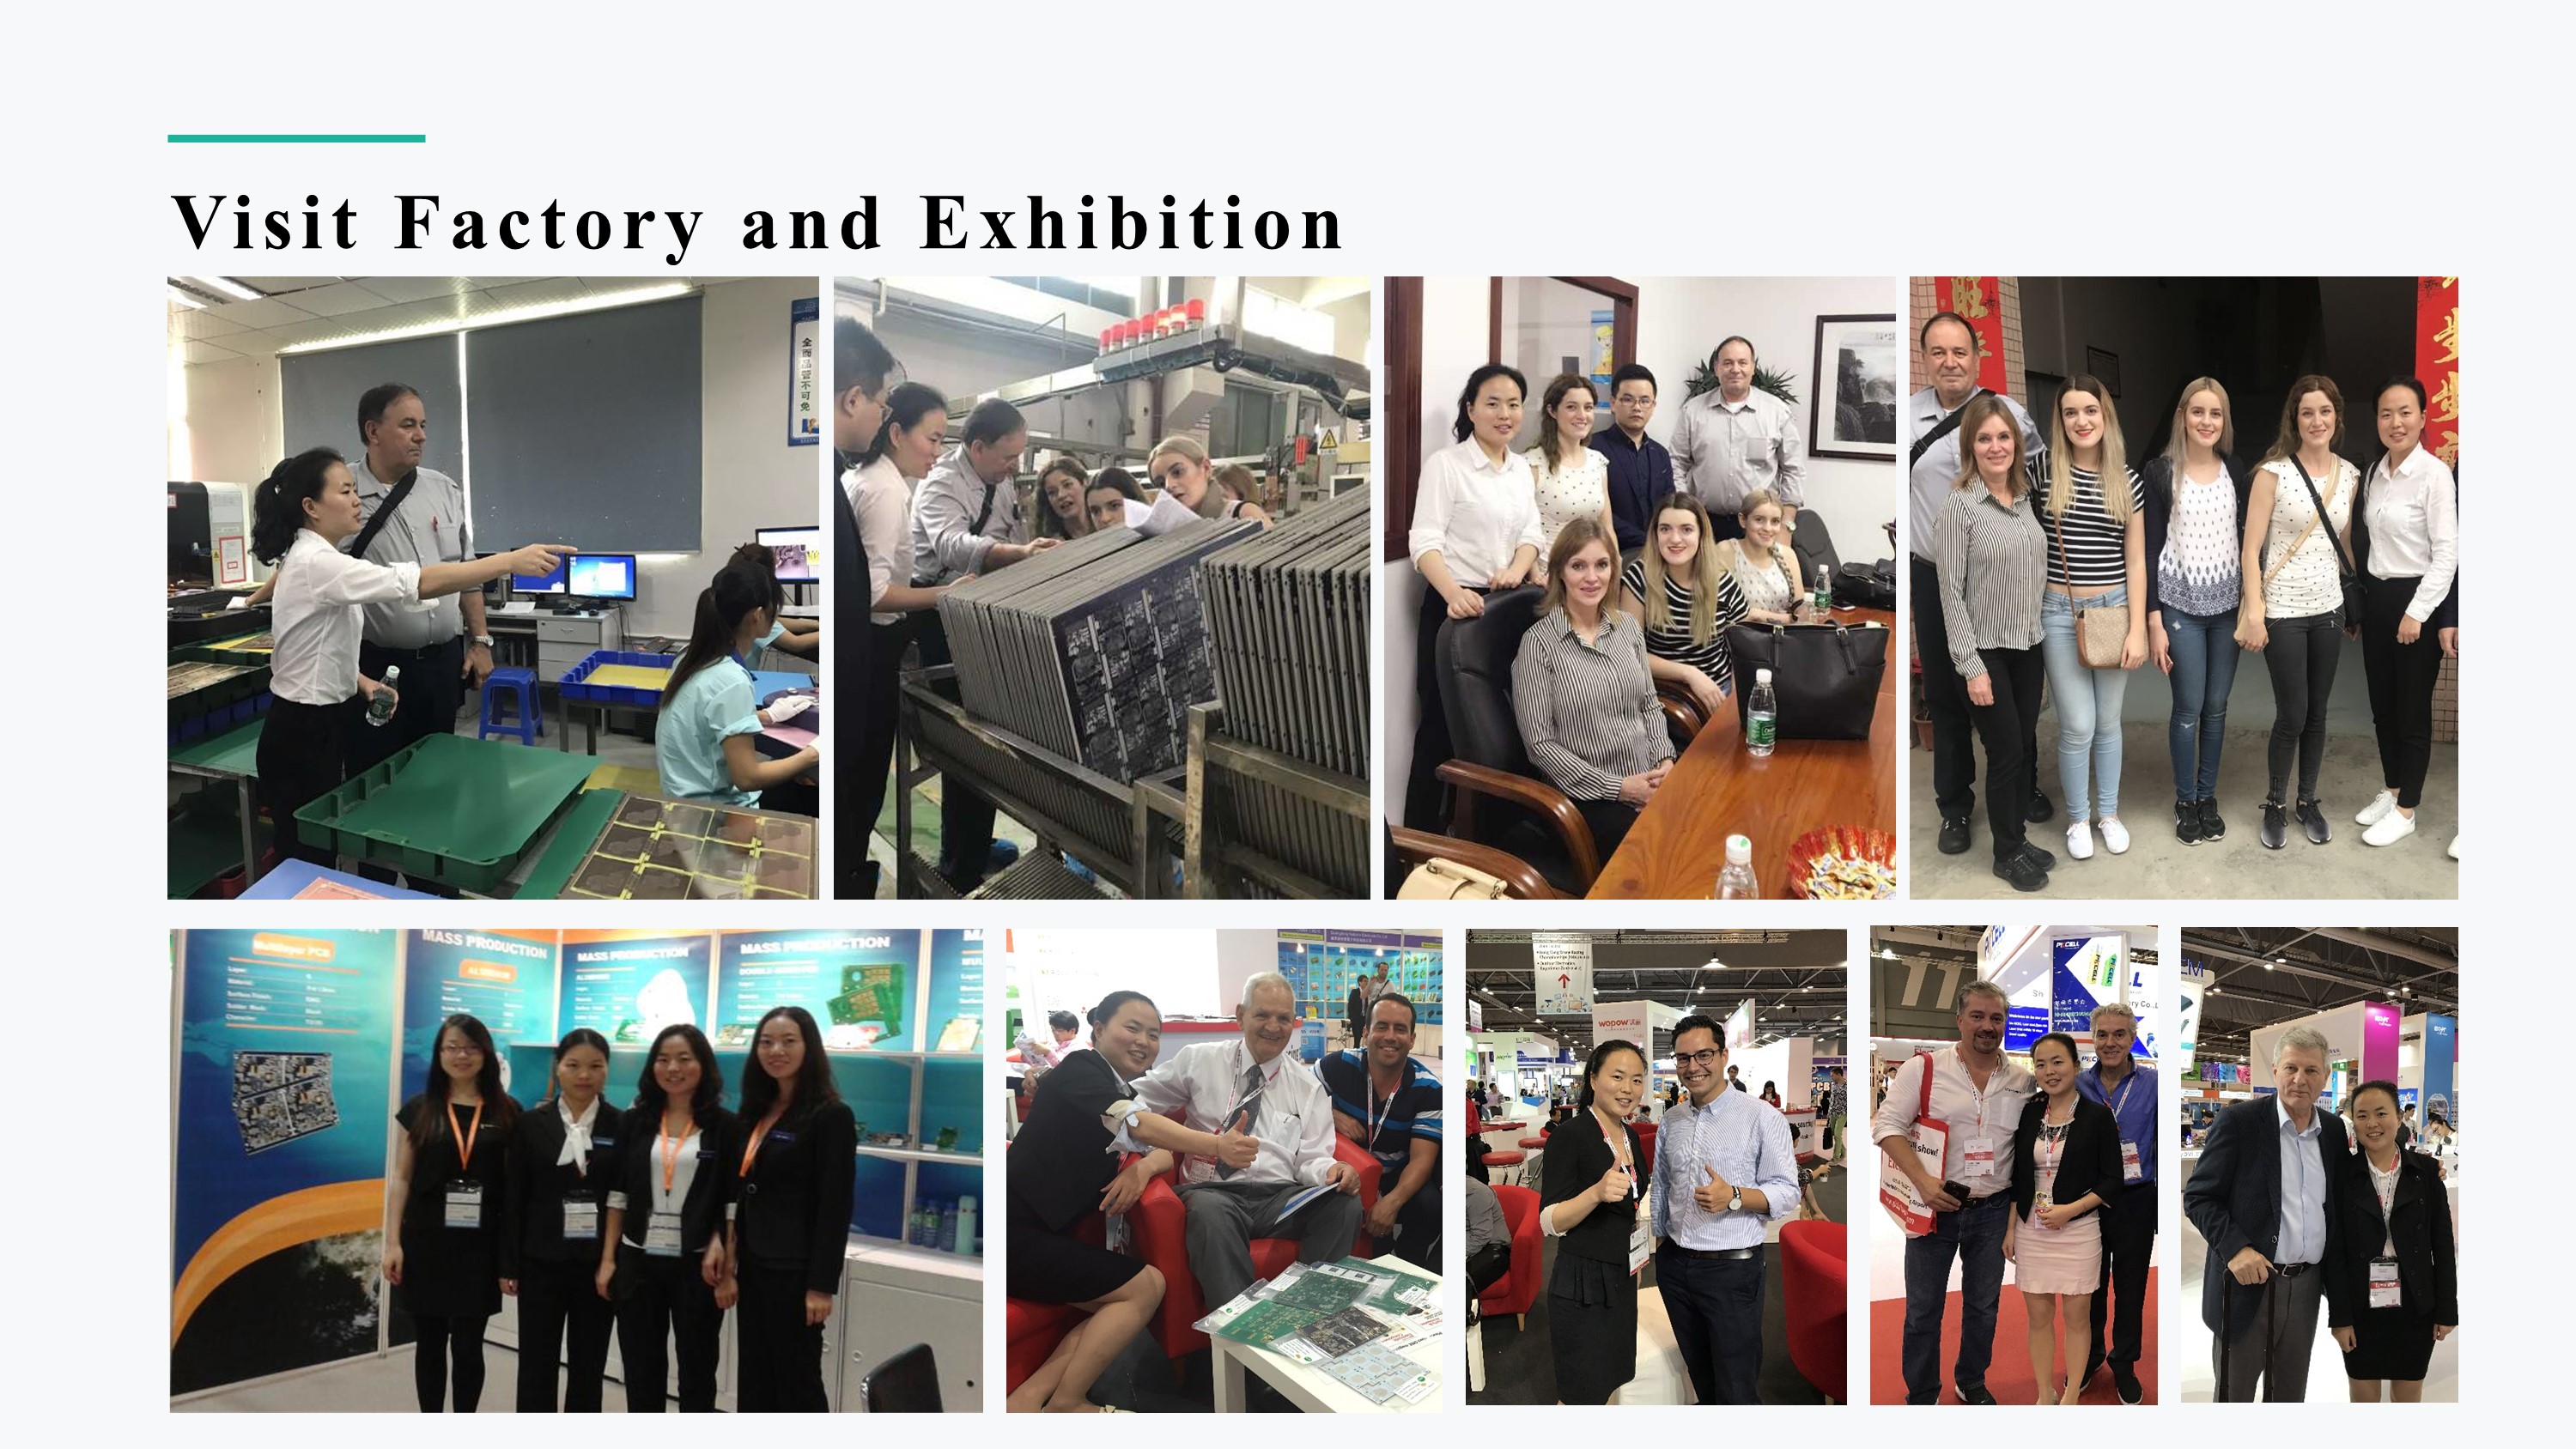 Visit Factory and Exhibition